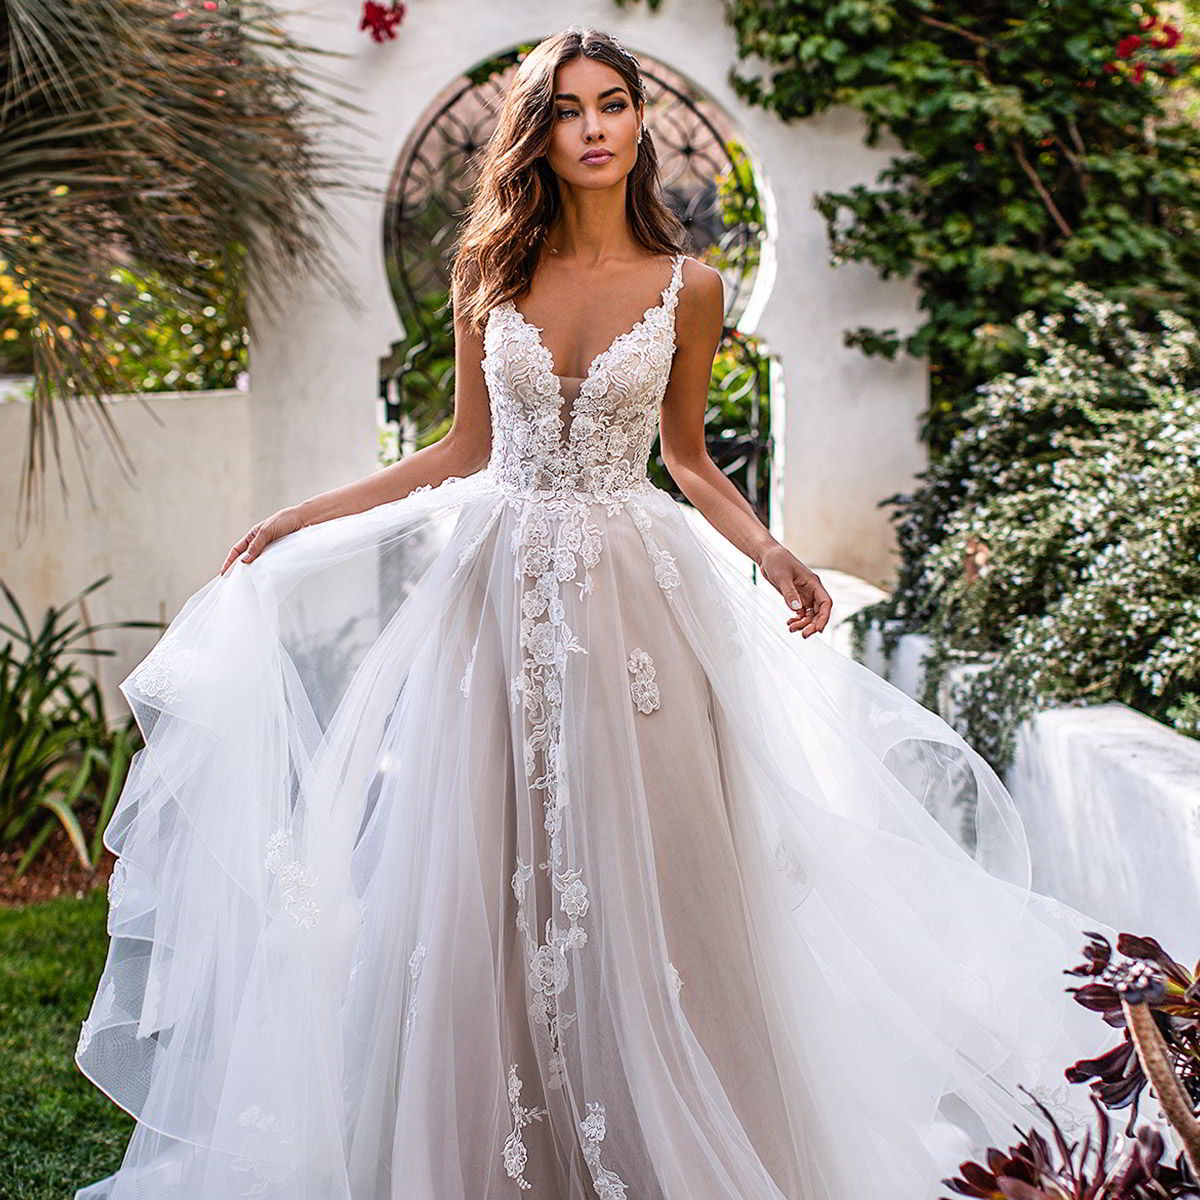 Moonlight Couture Fall 2019 Bridal Collection Featured On Wedding Inspirasi Thumbnail 